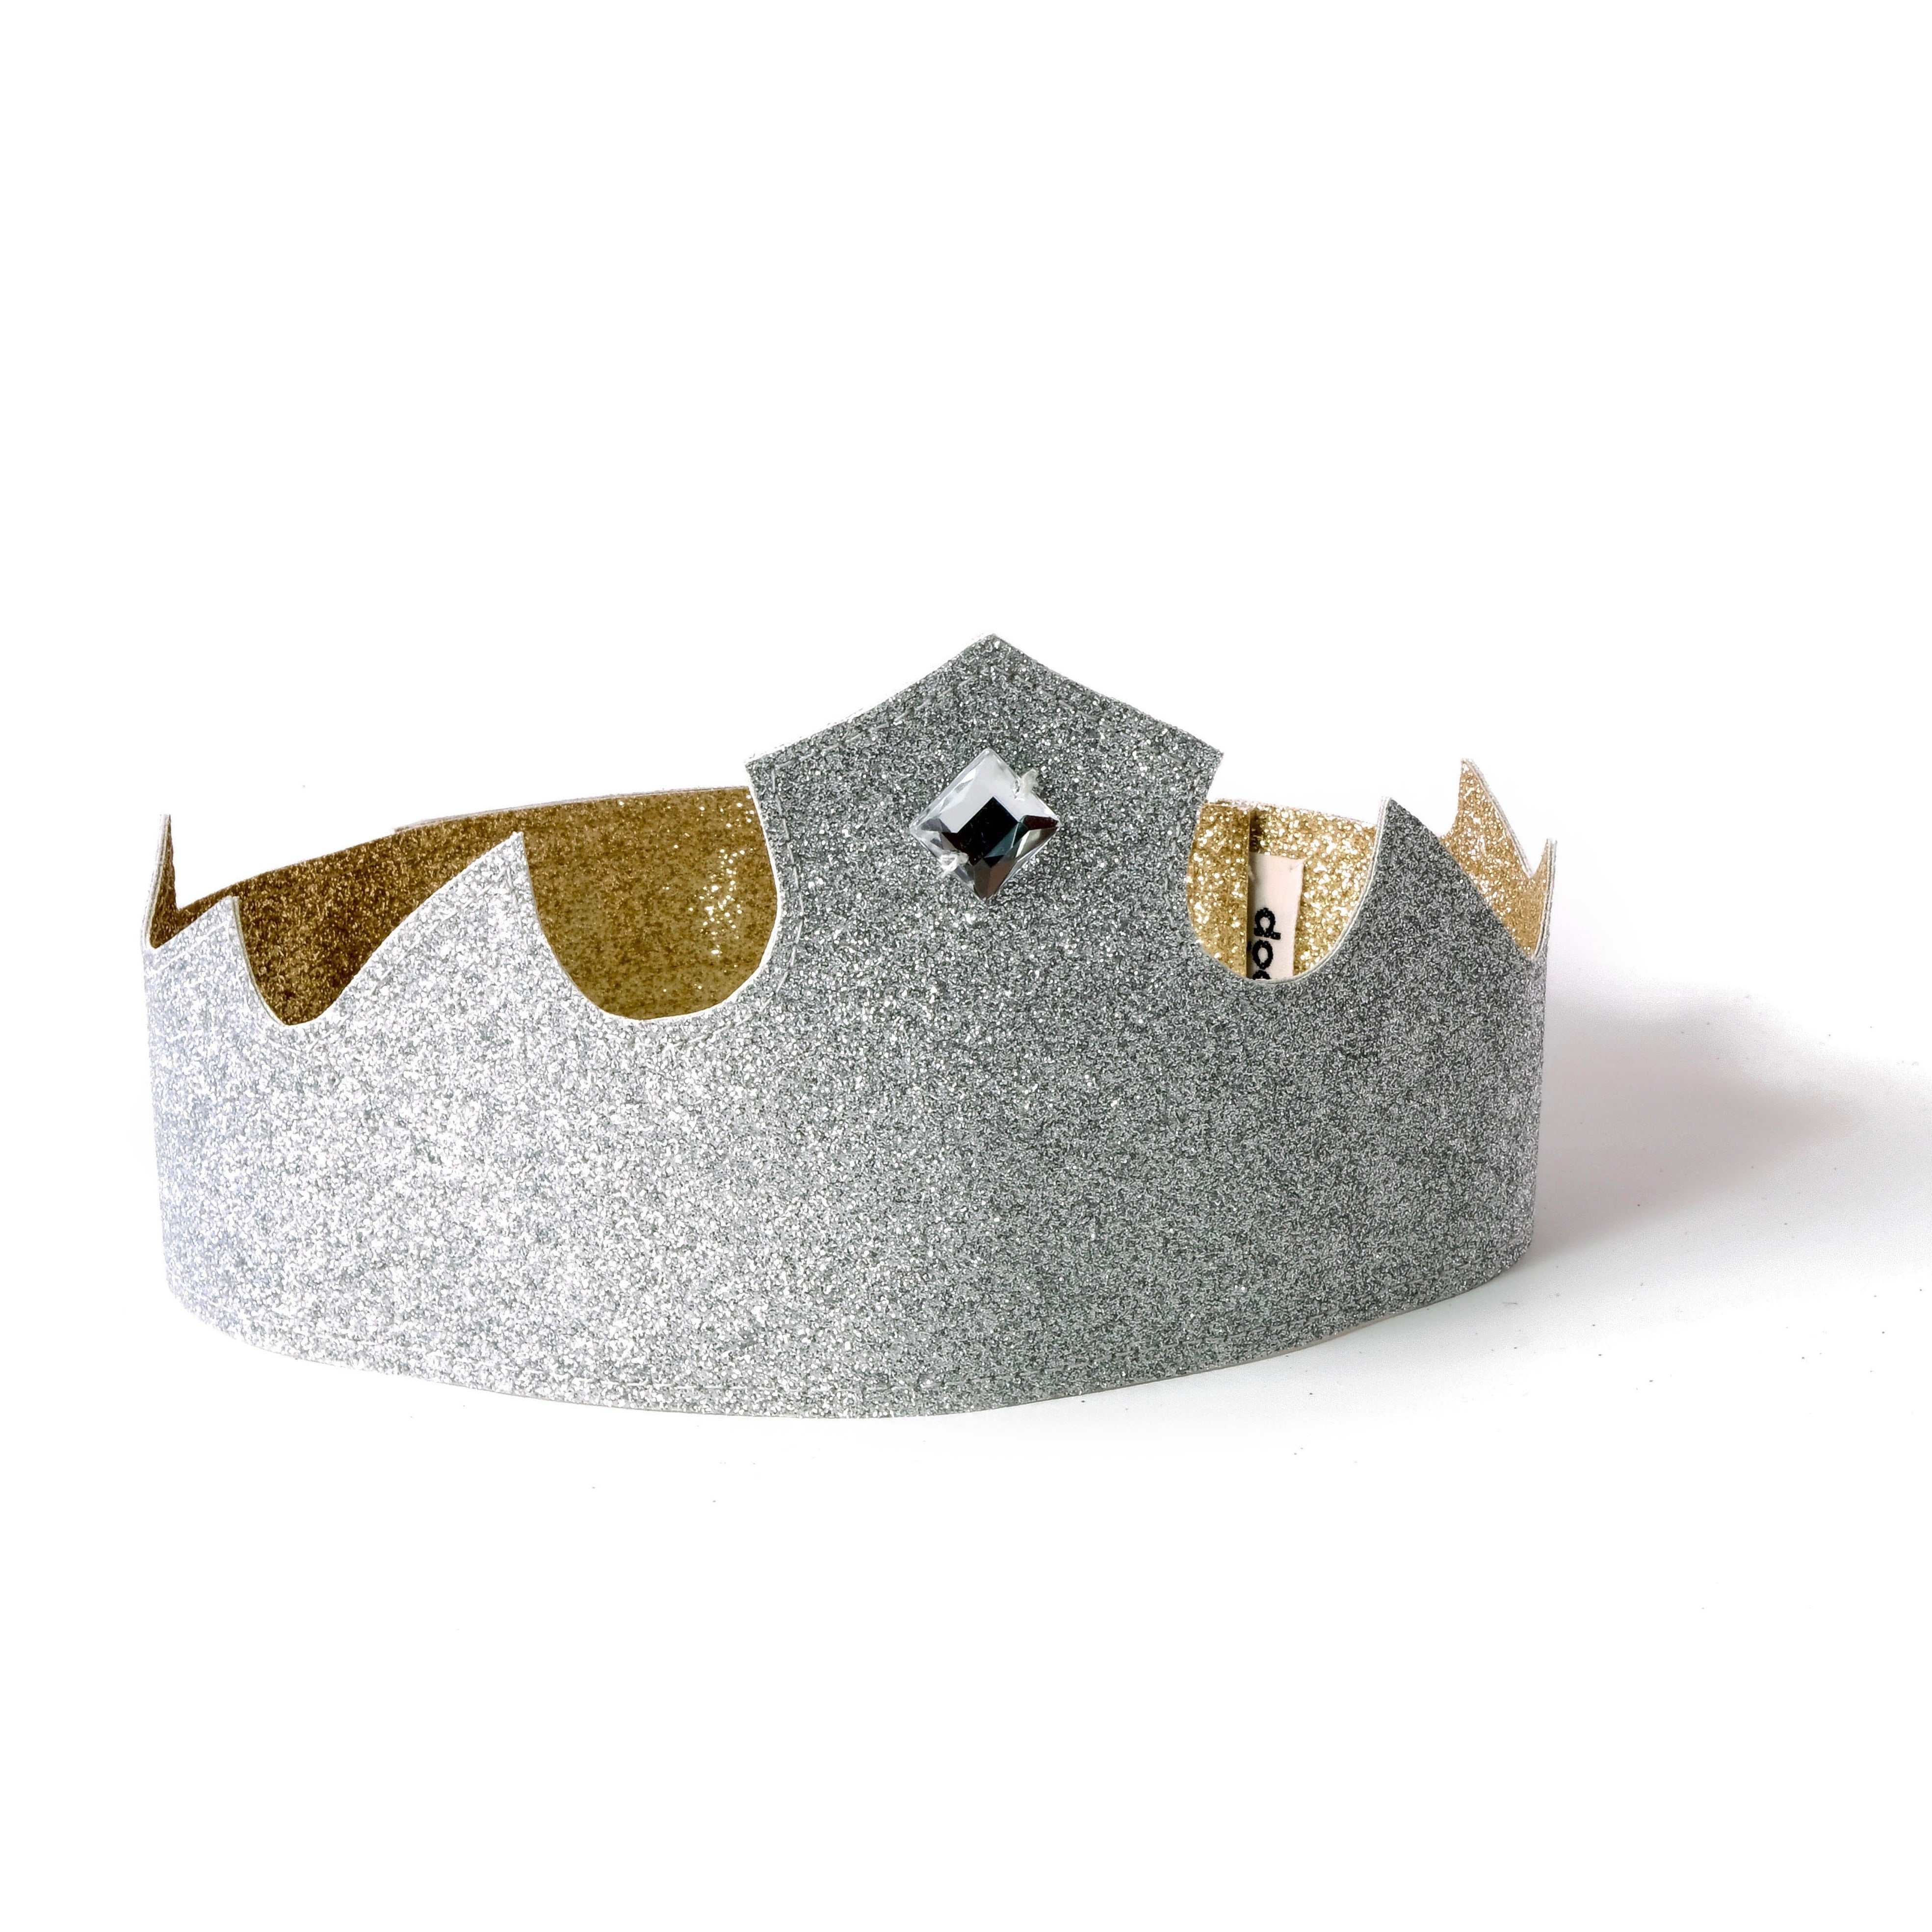 Reversible pretend-play crown by doodlelidoo.  It fits all with it's adjustable Velcro  closure  and  comes in gold color on one side and silver on the other with a gem in  the center.